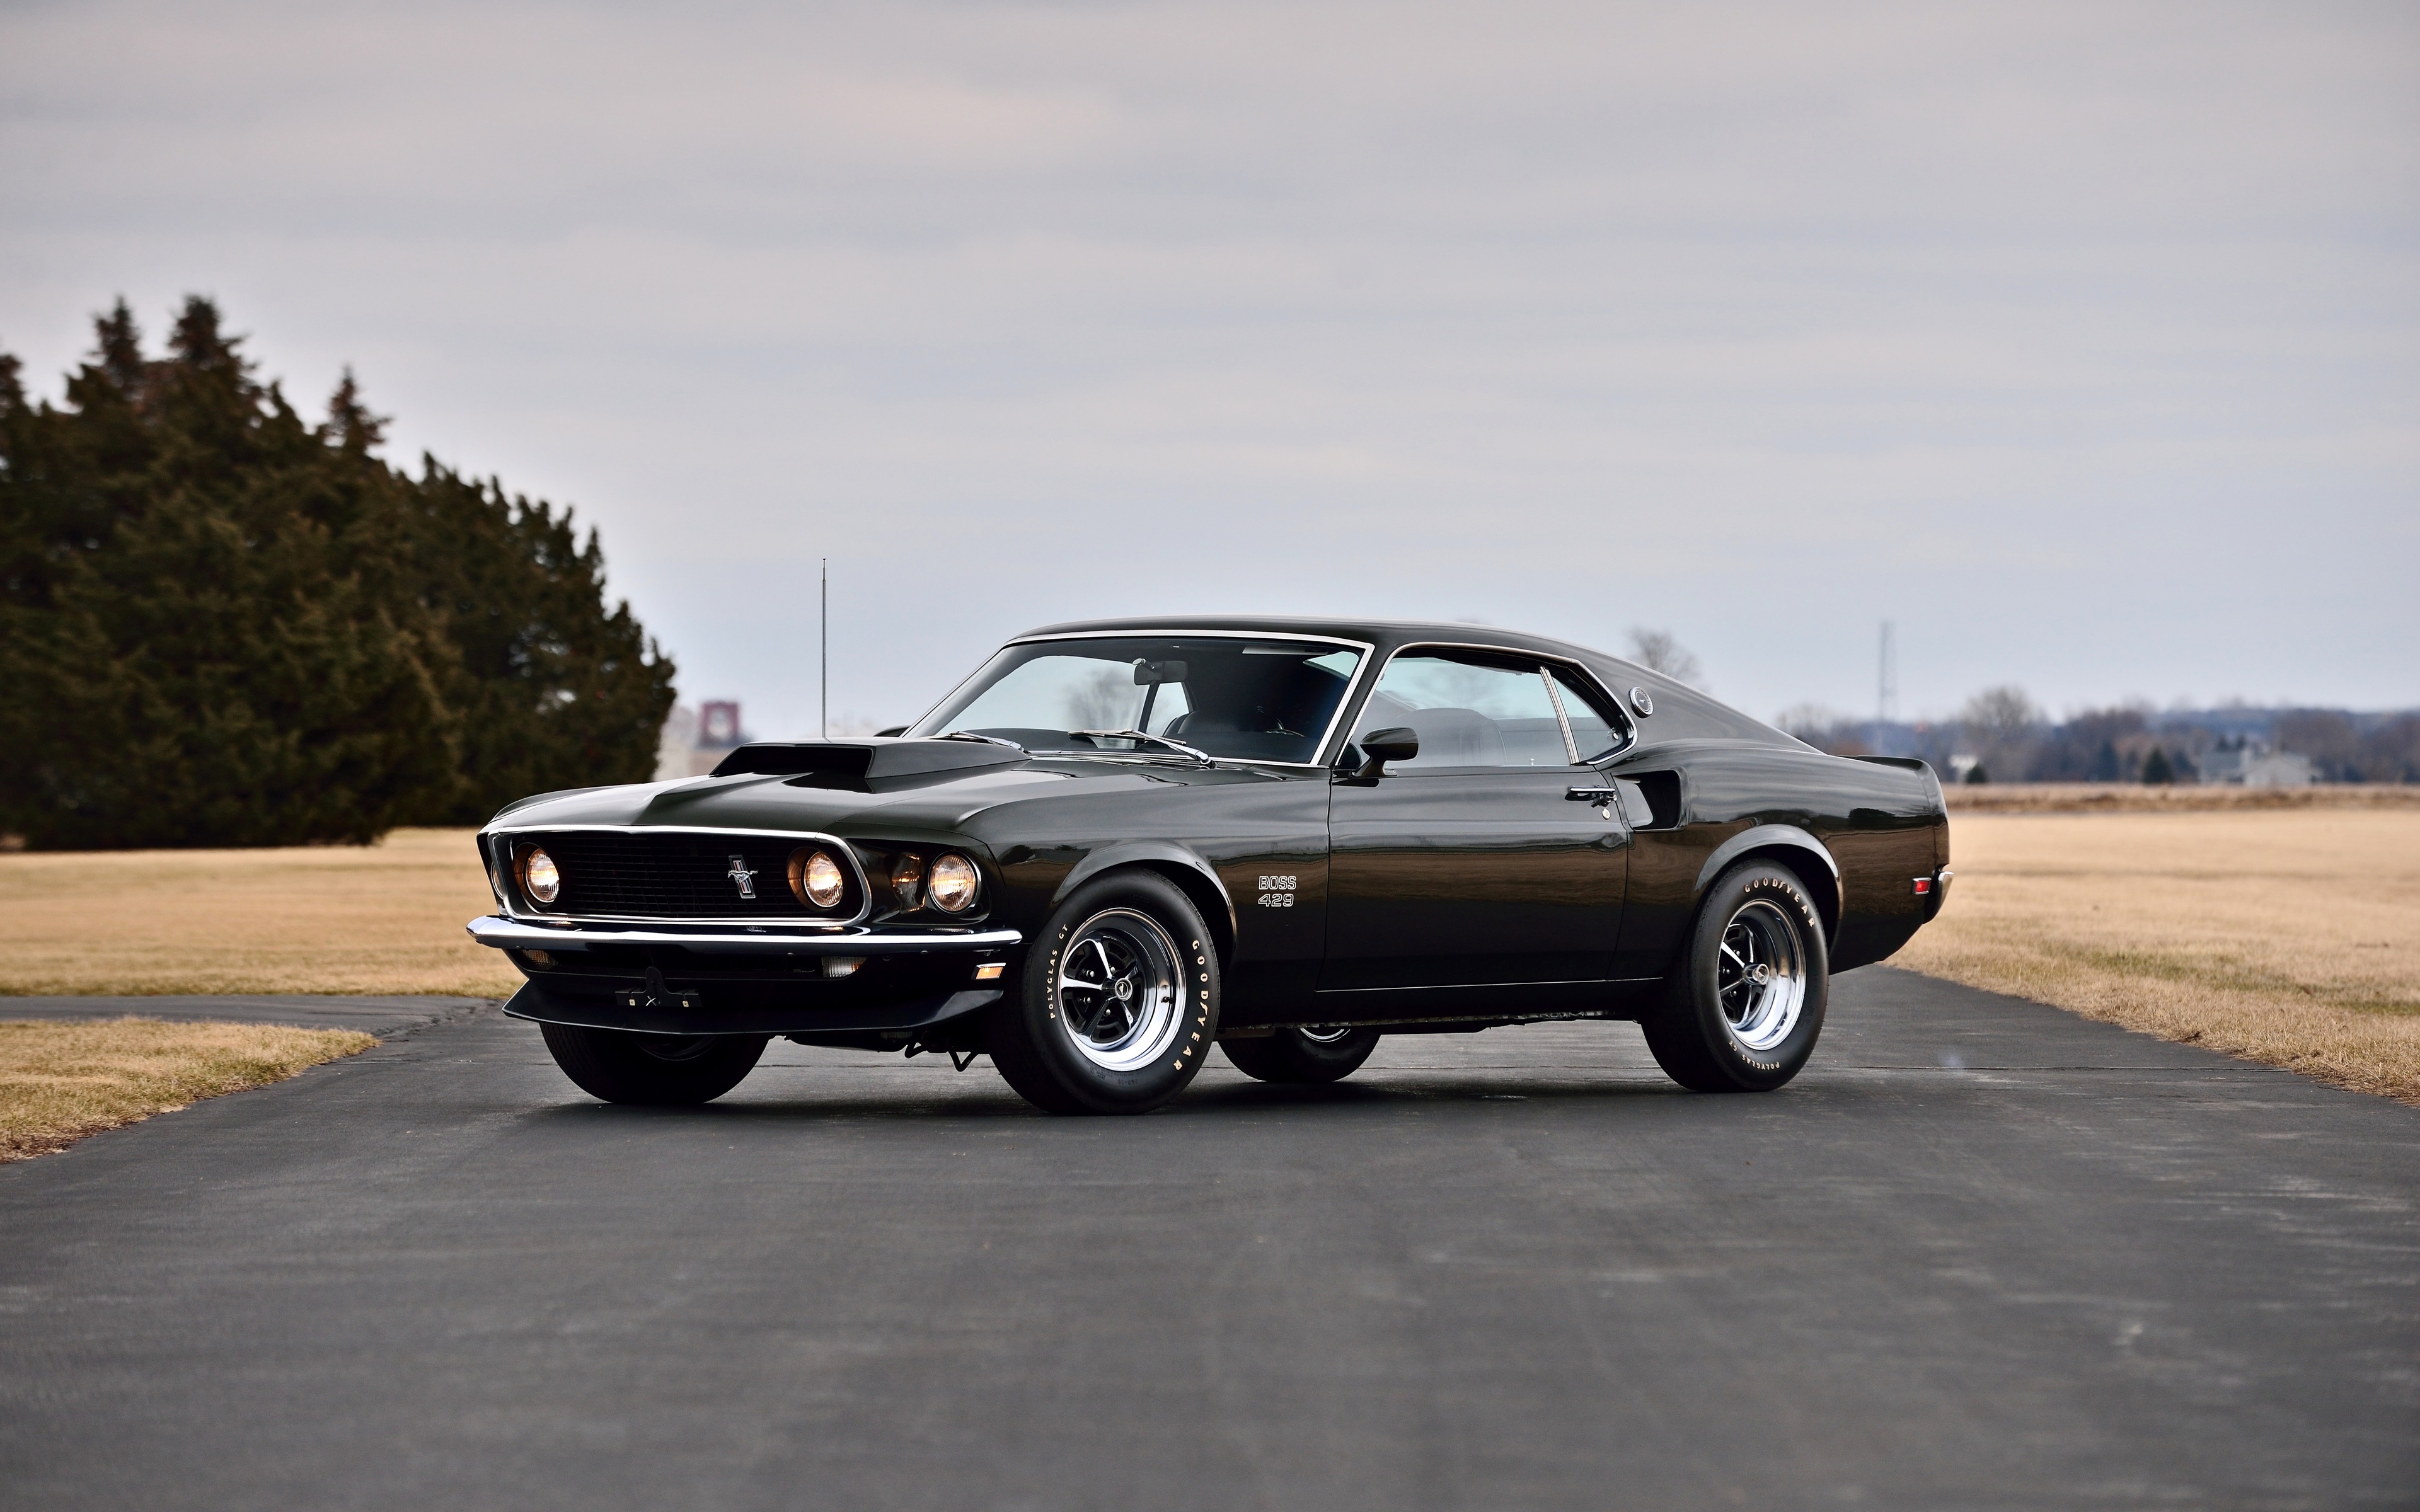 ford mustang boss 429, vehicles, black car, car, fastback, muscle car, ford